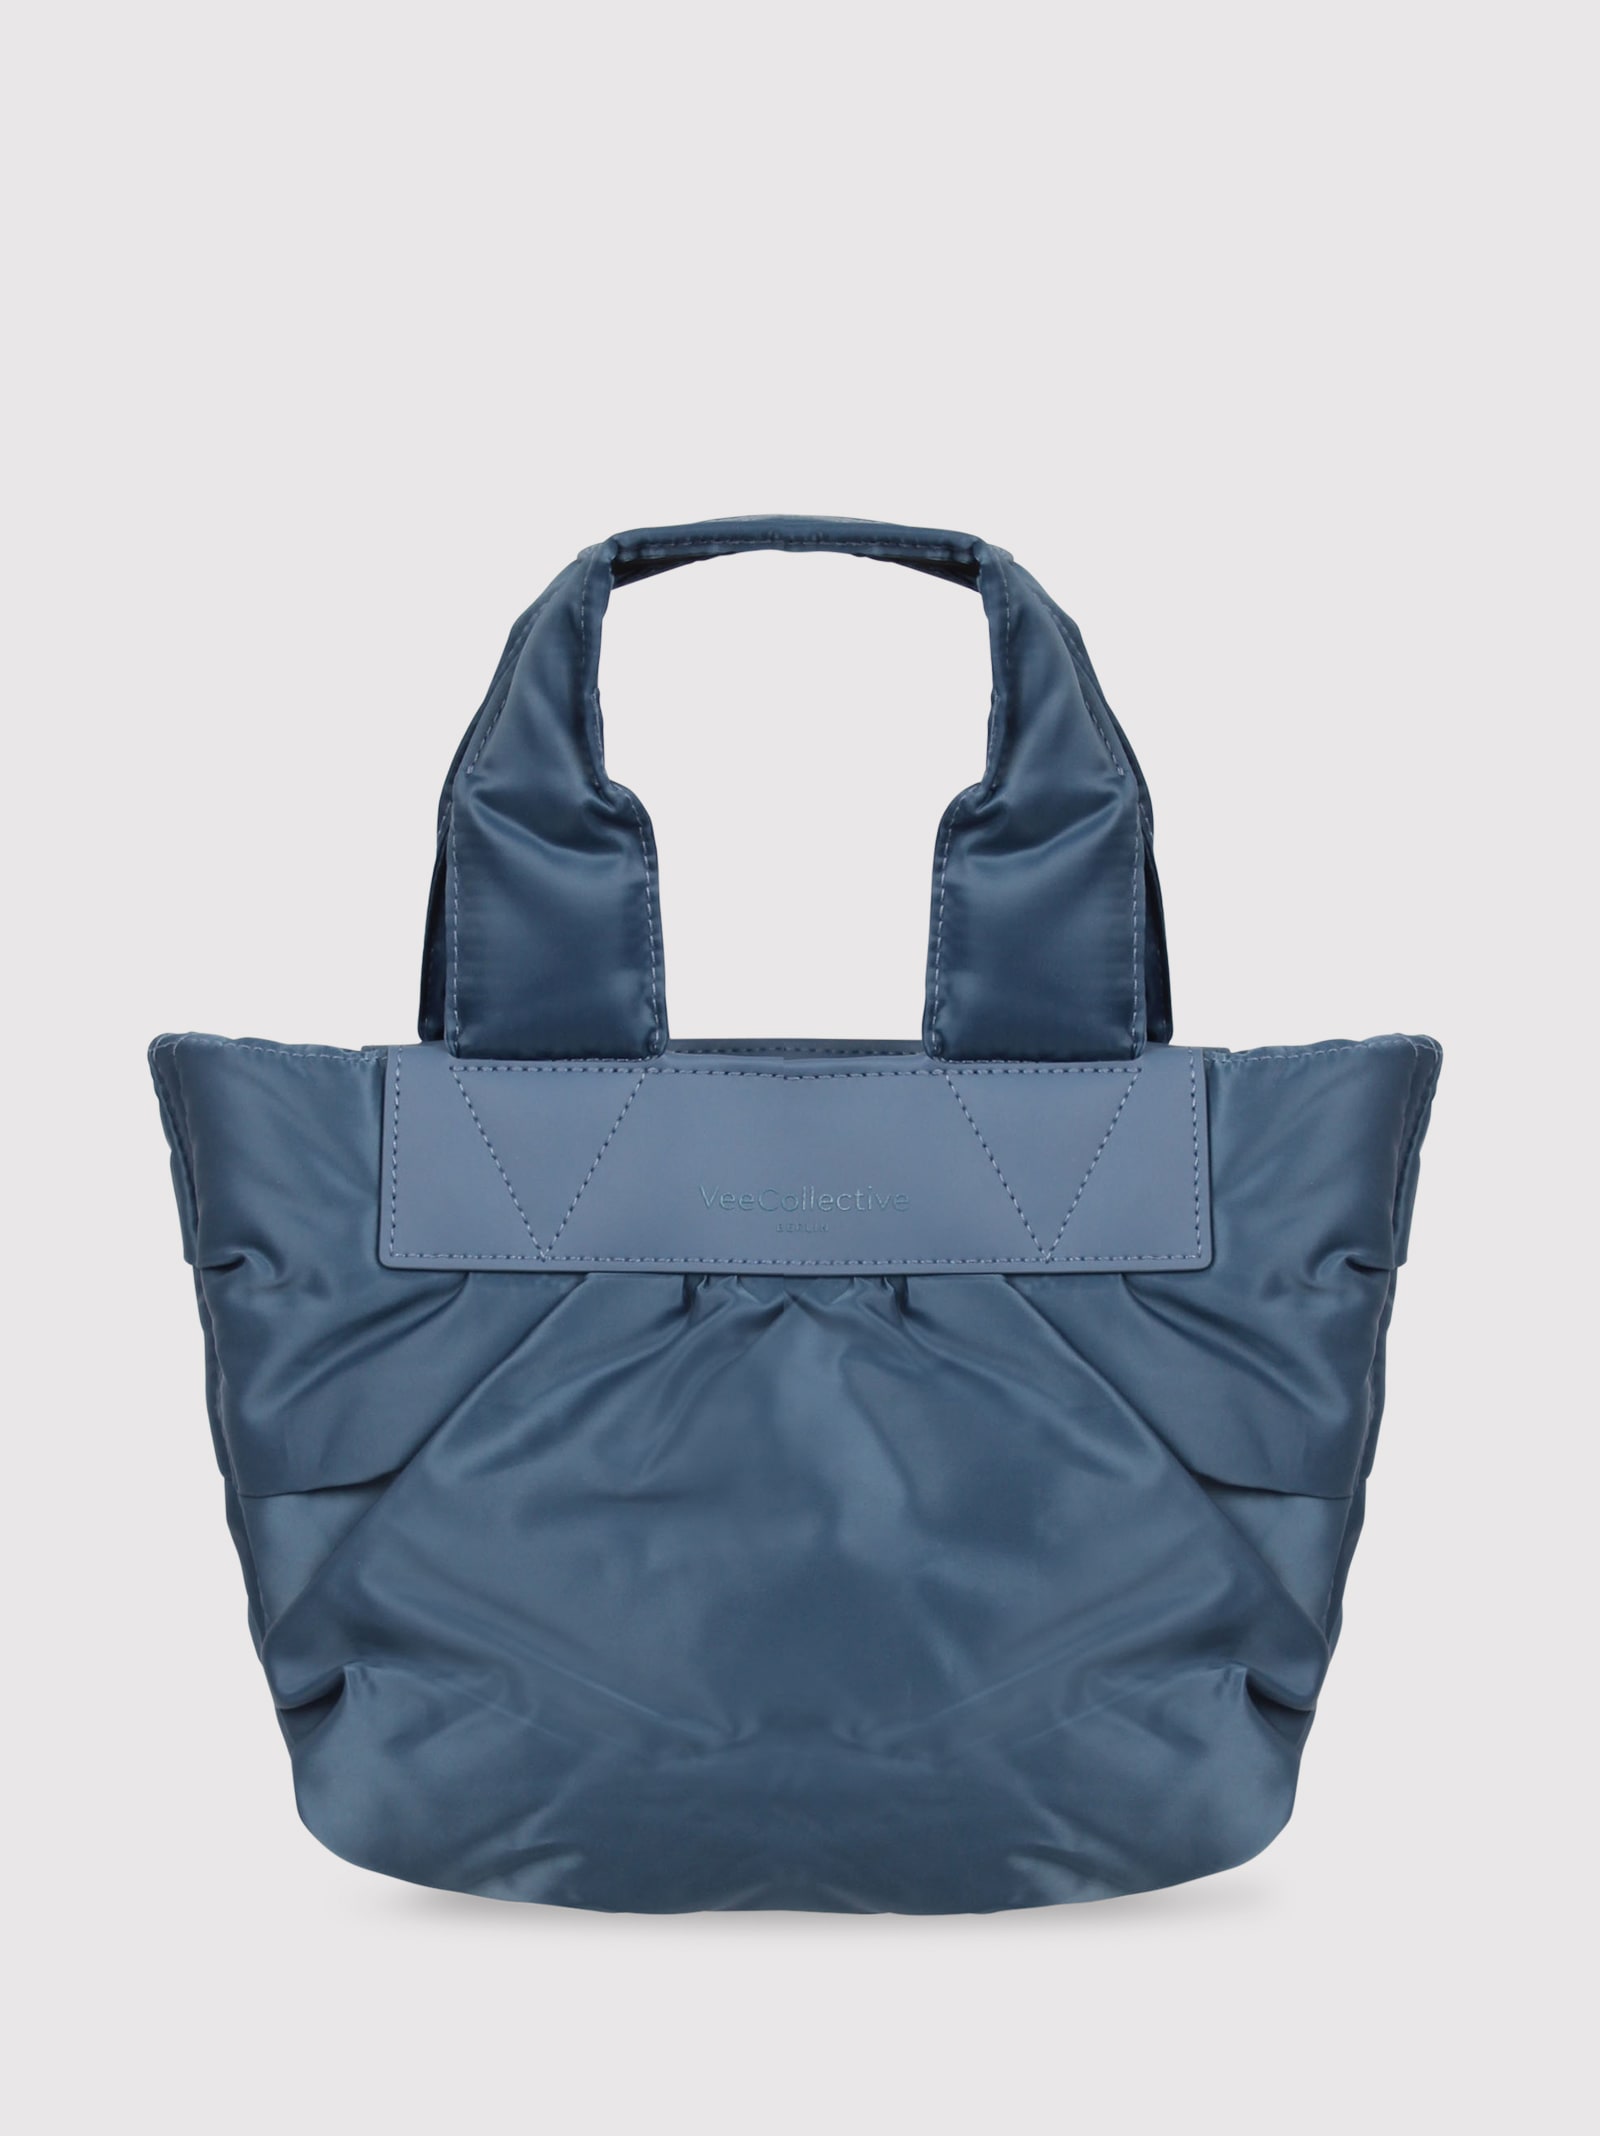 Veecollective Vee Collective Mini Caba Tote Bag In Blue